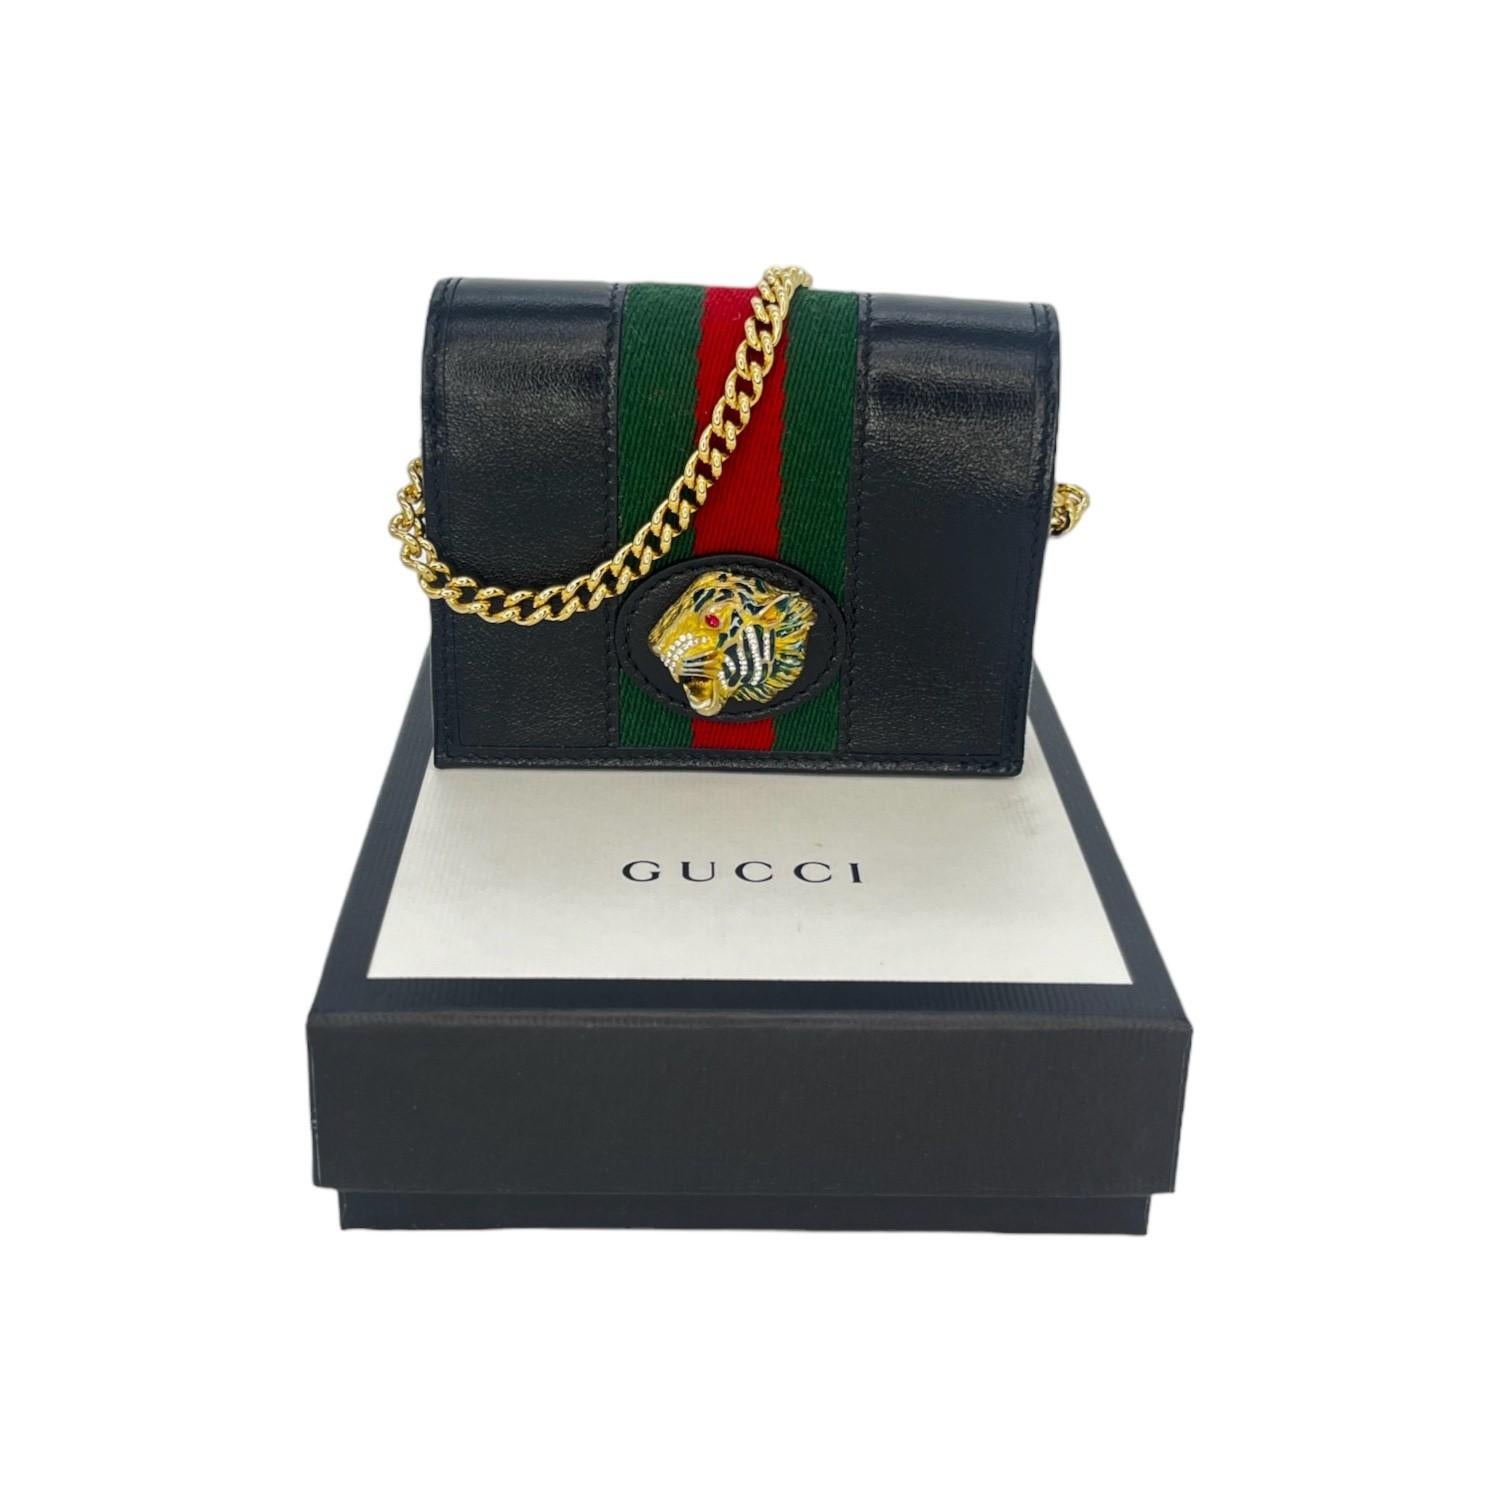 Gucci Web Rajah Chain Card Case Wallet. This chic wallet is crafted of calfskin leather in black and features an optional gold chain strap, a green and red webbed stripe, and a crystal-encrusted tiger head. The flap opens to a leather interior with